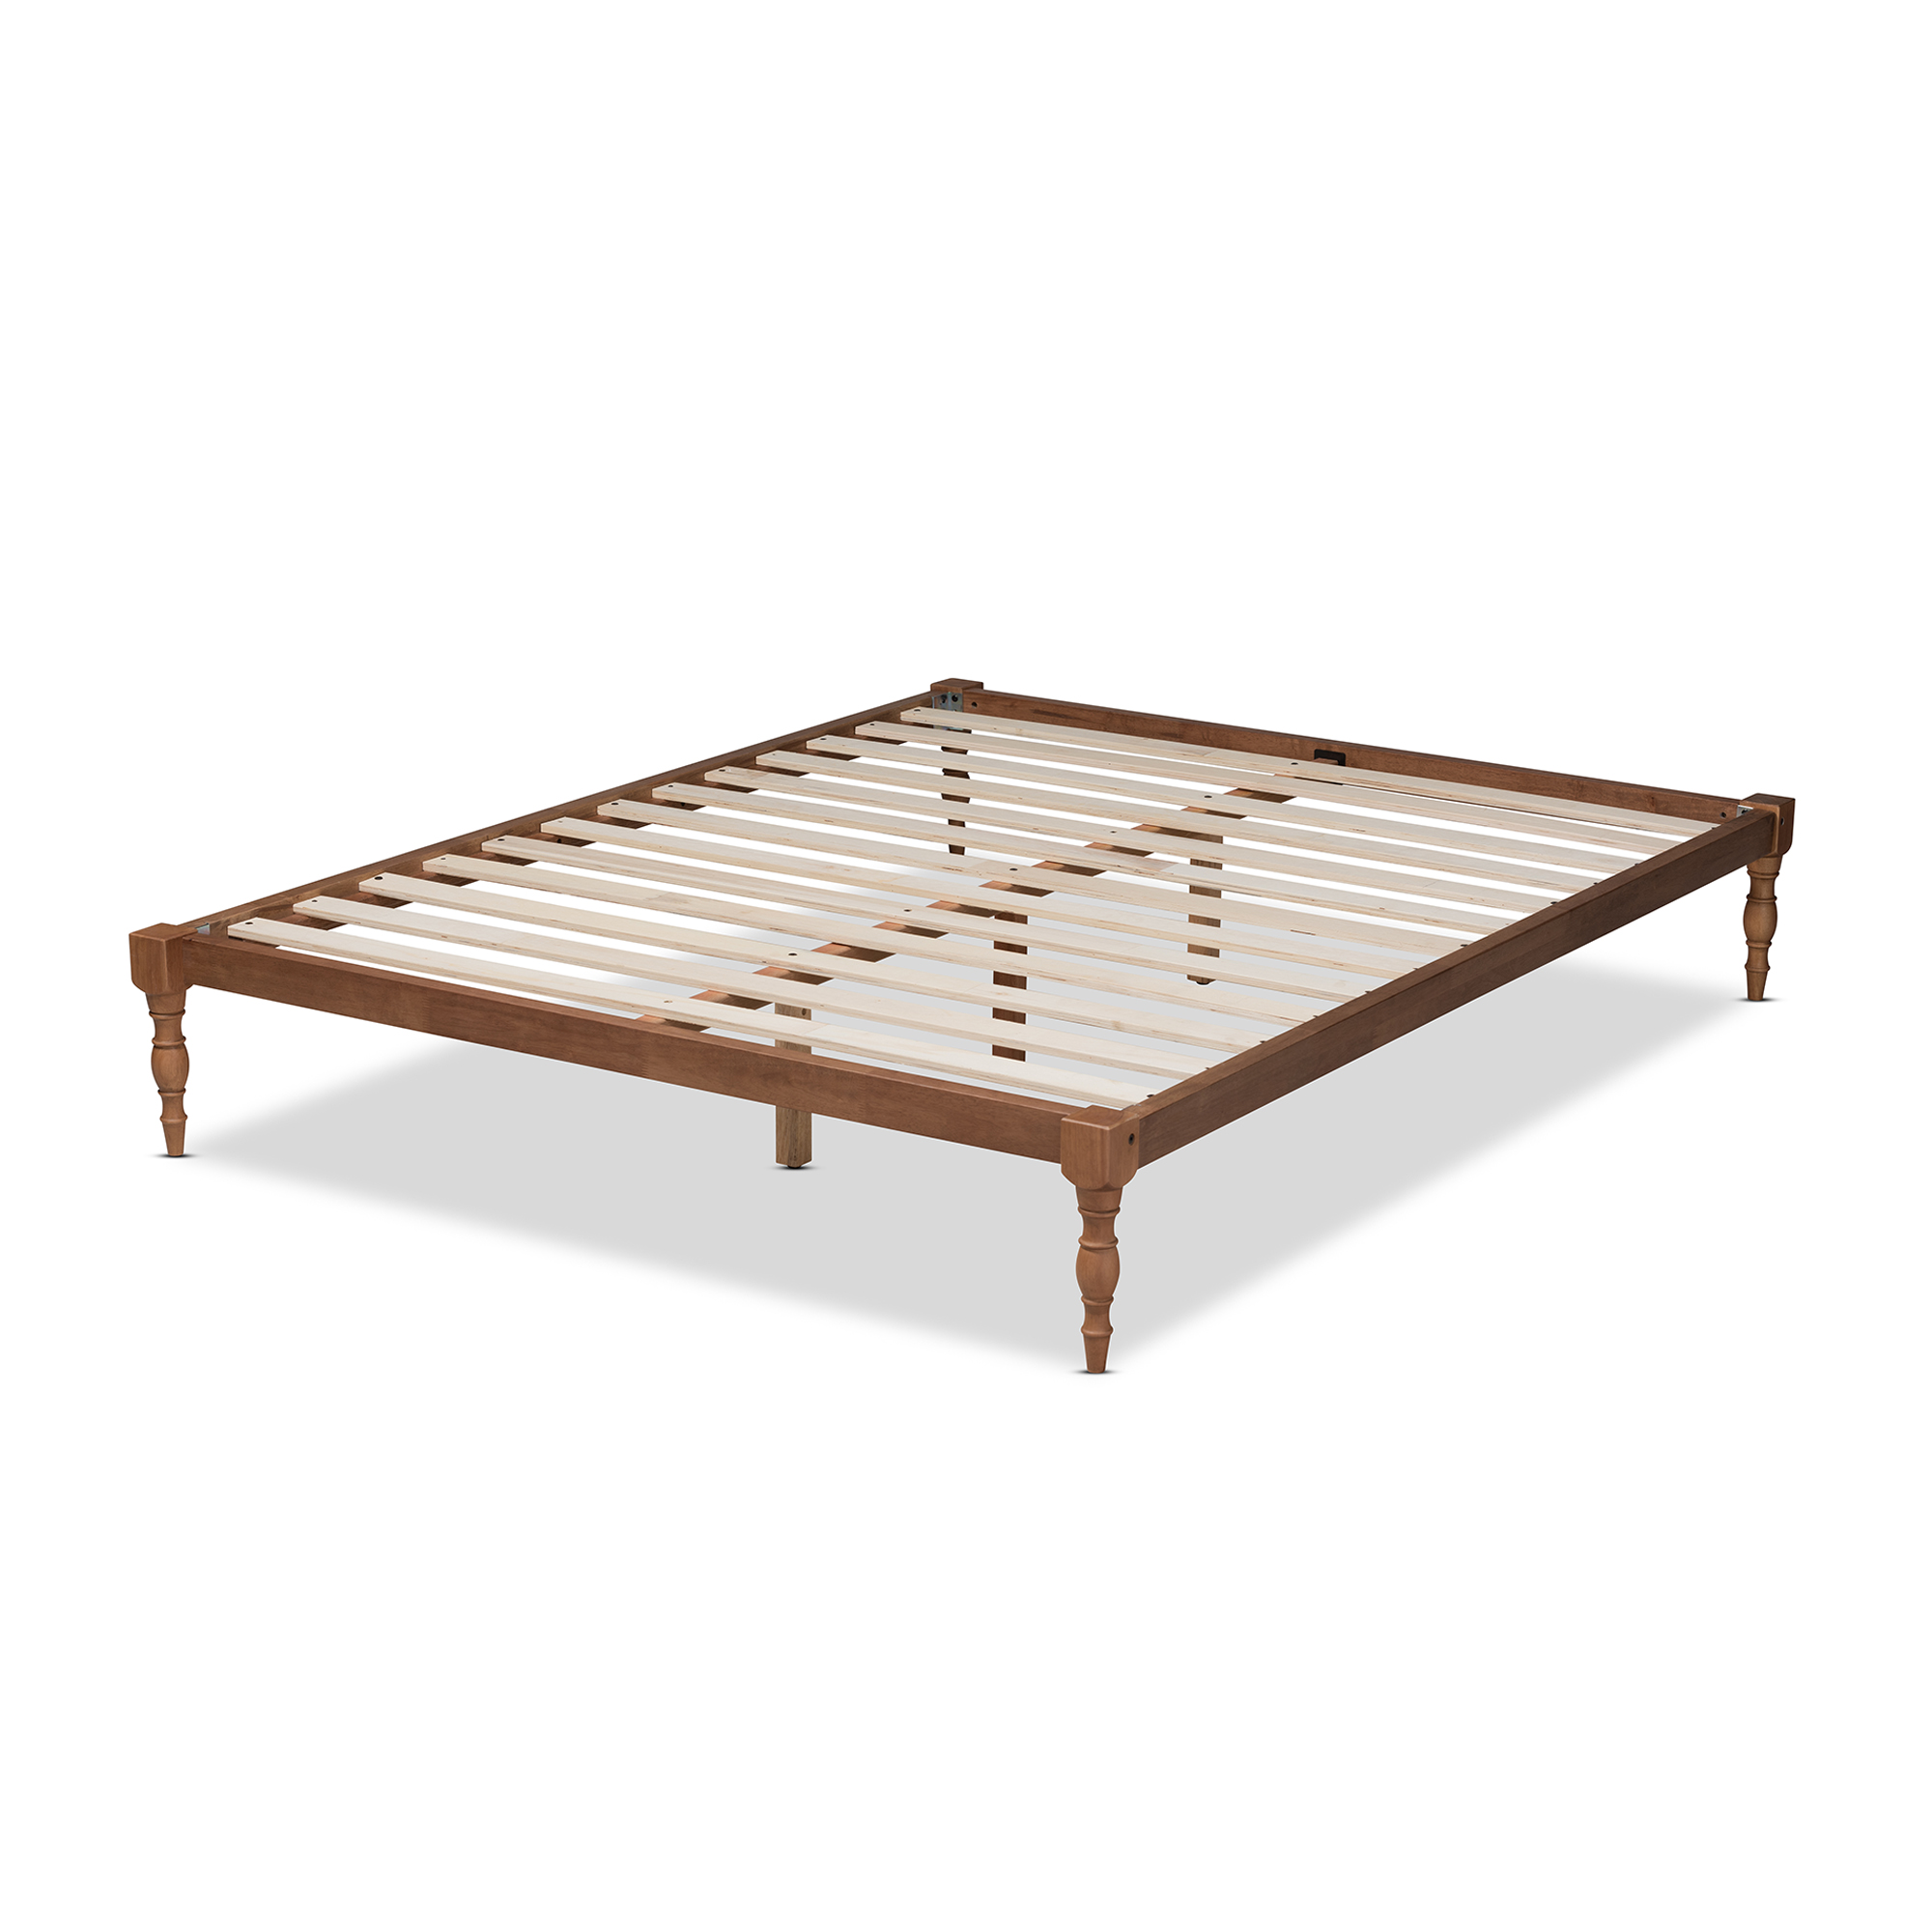 Baxton Studio Iseline Modern and Contemporary Walnut Brown Finished Wood Full Size Platform Bed Frame - image 2 of 9